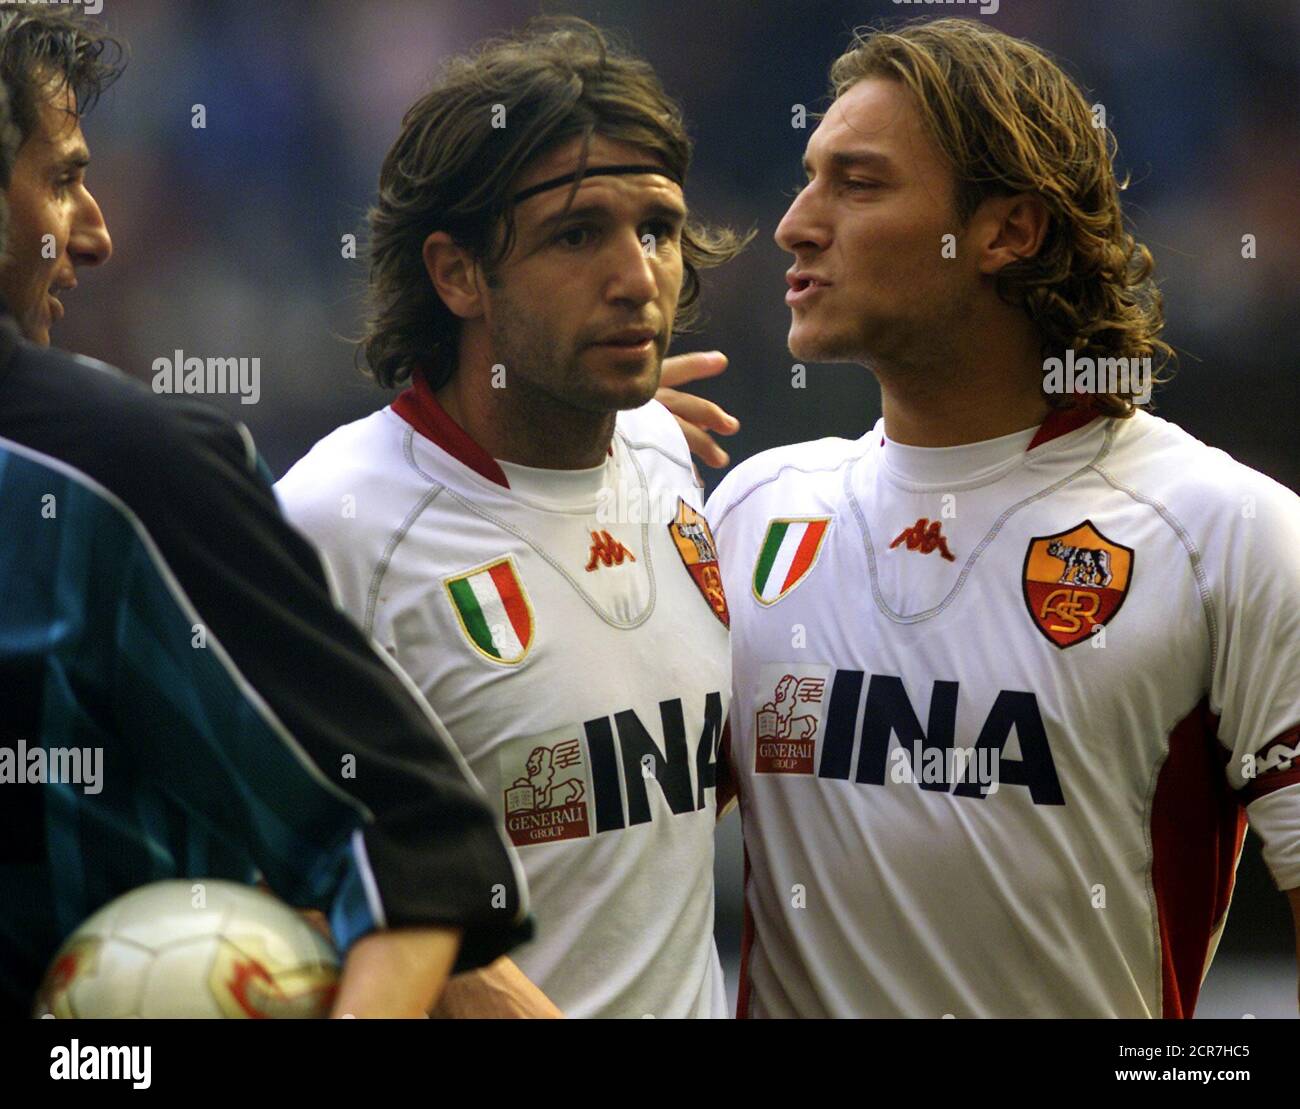 A.S. Roma striker Francesco Totti (R) and Vincent Candela dissuss with the  refree Gianluca Paparesta at the end of the match against A.C. Milan, at  Meazza stadium in Milan, April 21, 2002.